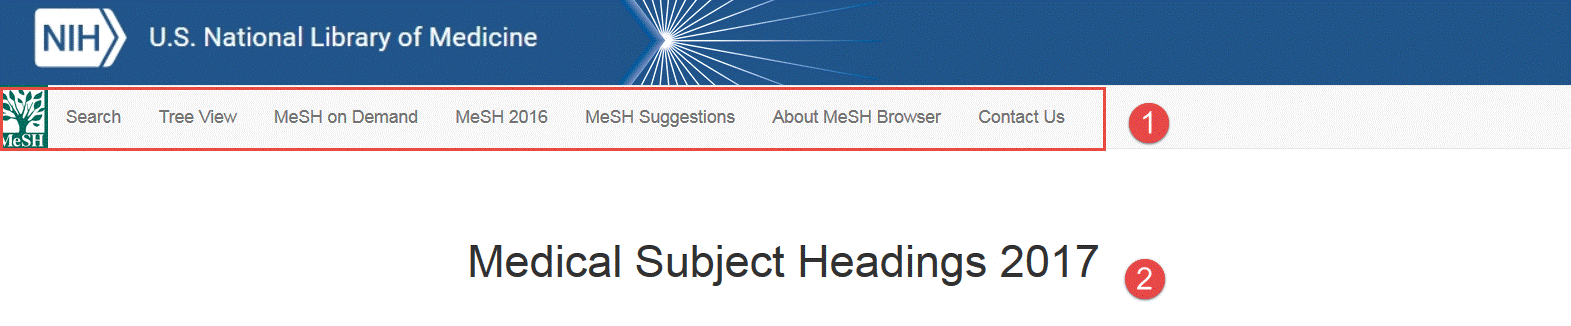 Screen capture of the main MeSH Browser search screen with red arrow pointing to Find Exact Term.